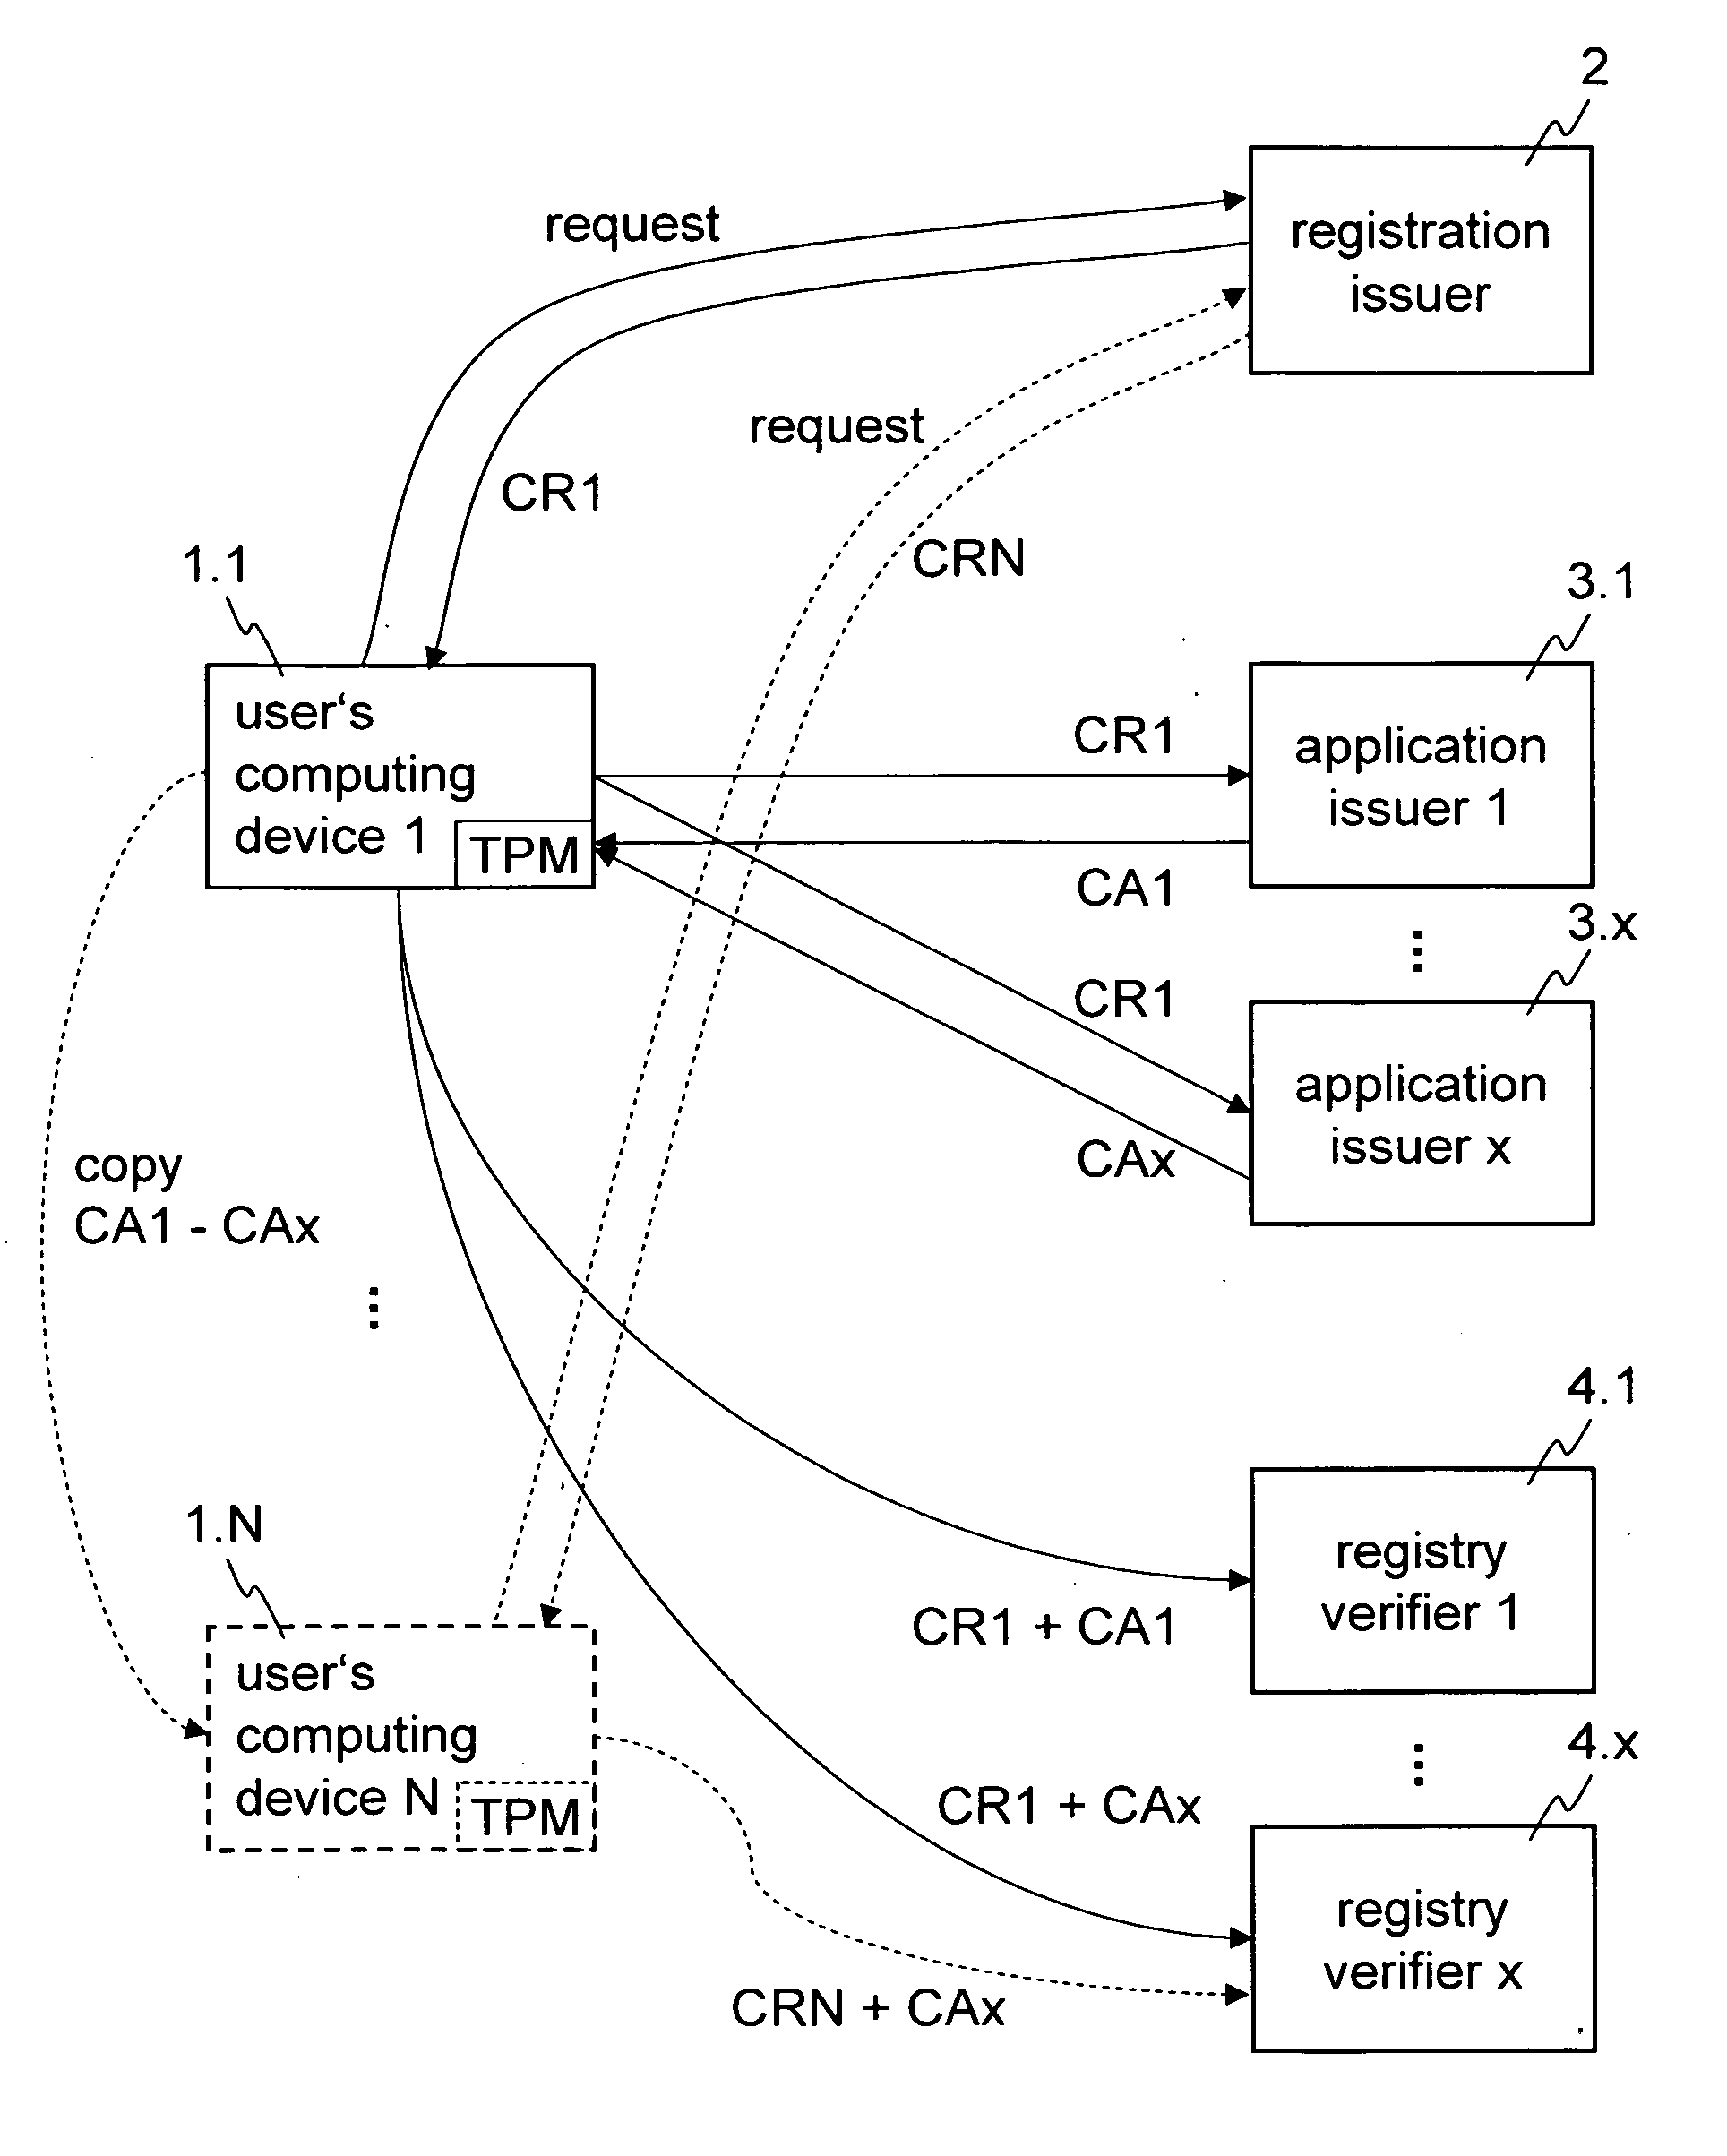 Method and apparatus for obtaining and verifying credentials for accessing a computer application program